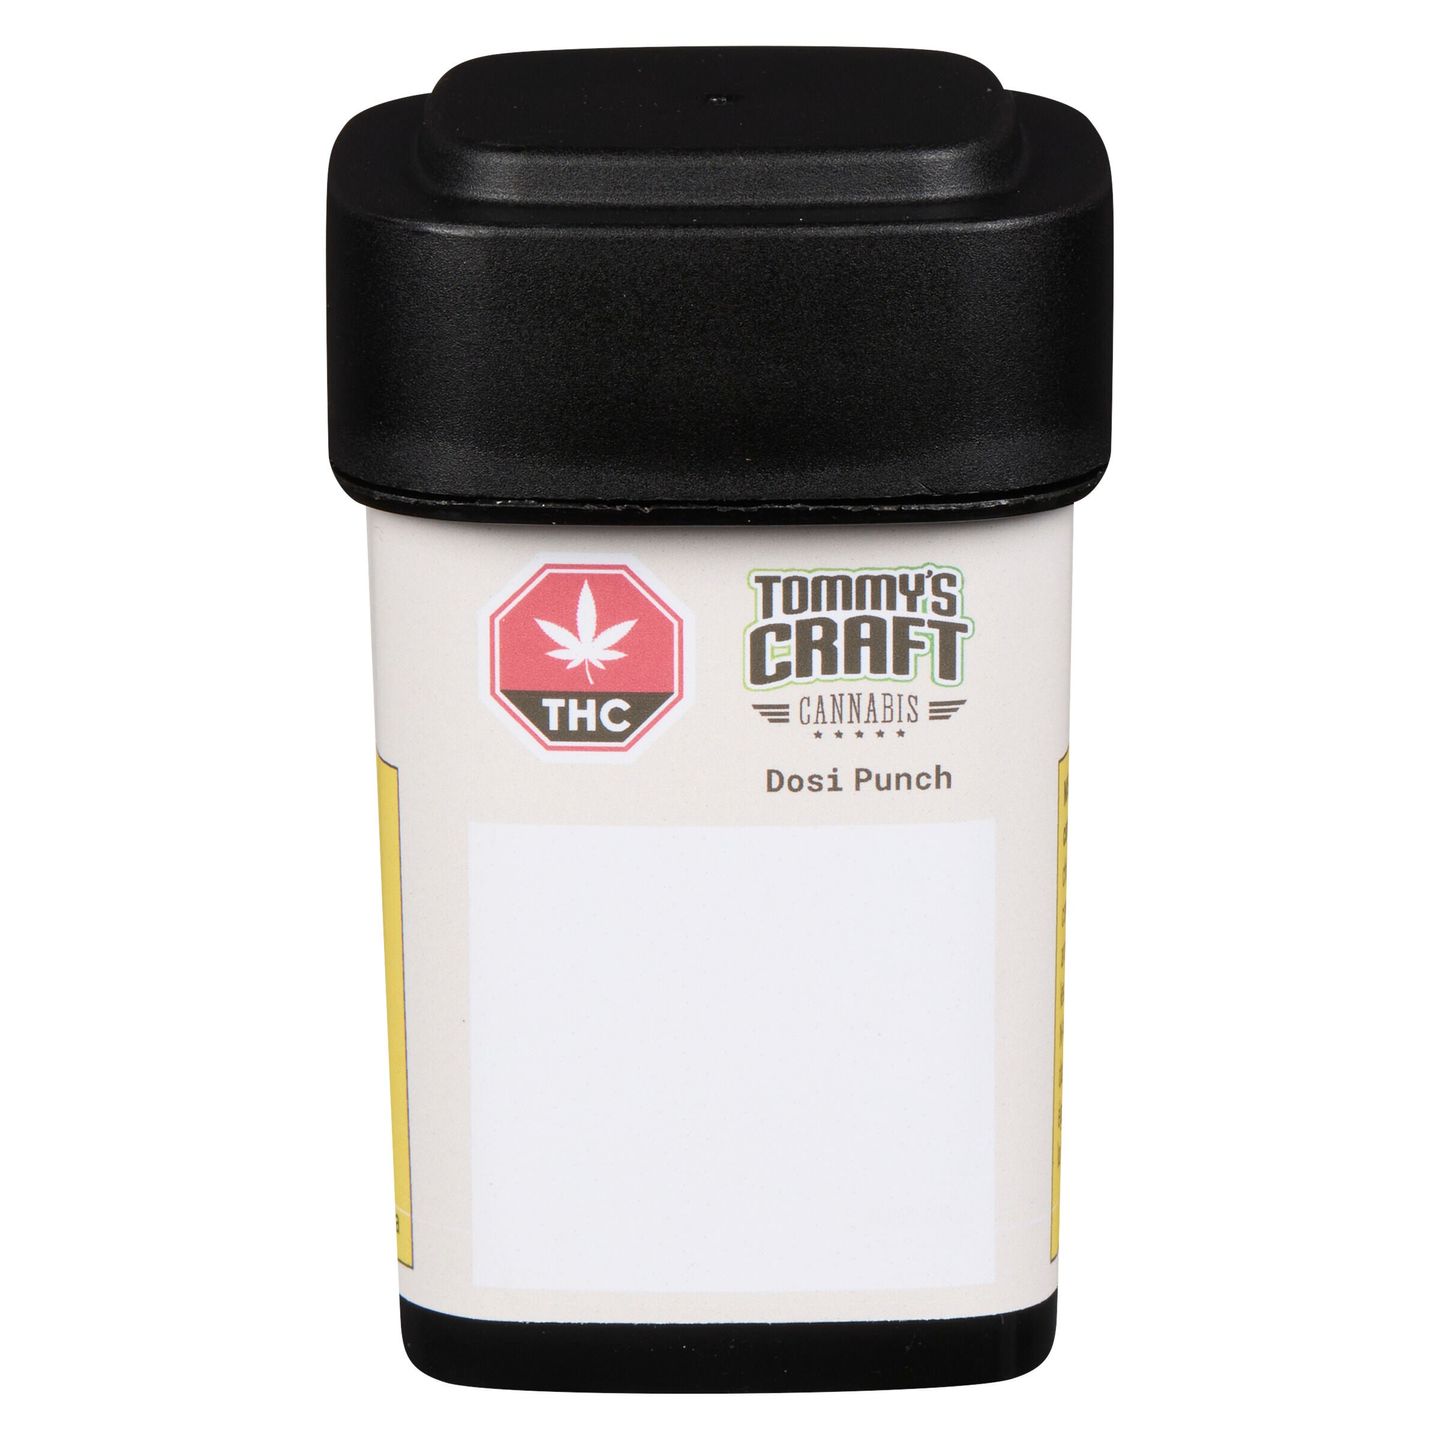 Cannabis Product Tommy's Dosi Punch Pre-Rolls by Tommy's Craft Cannabis